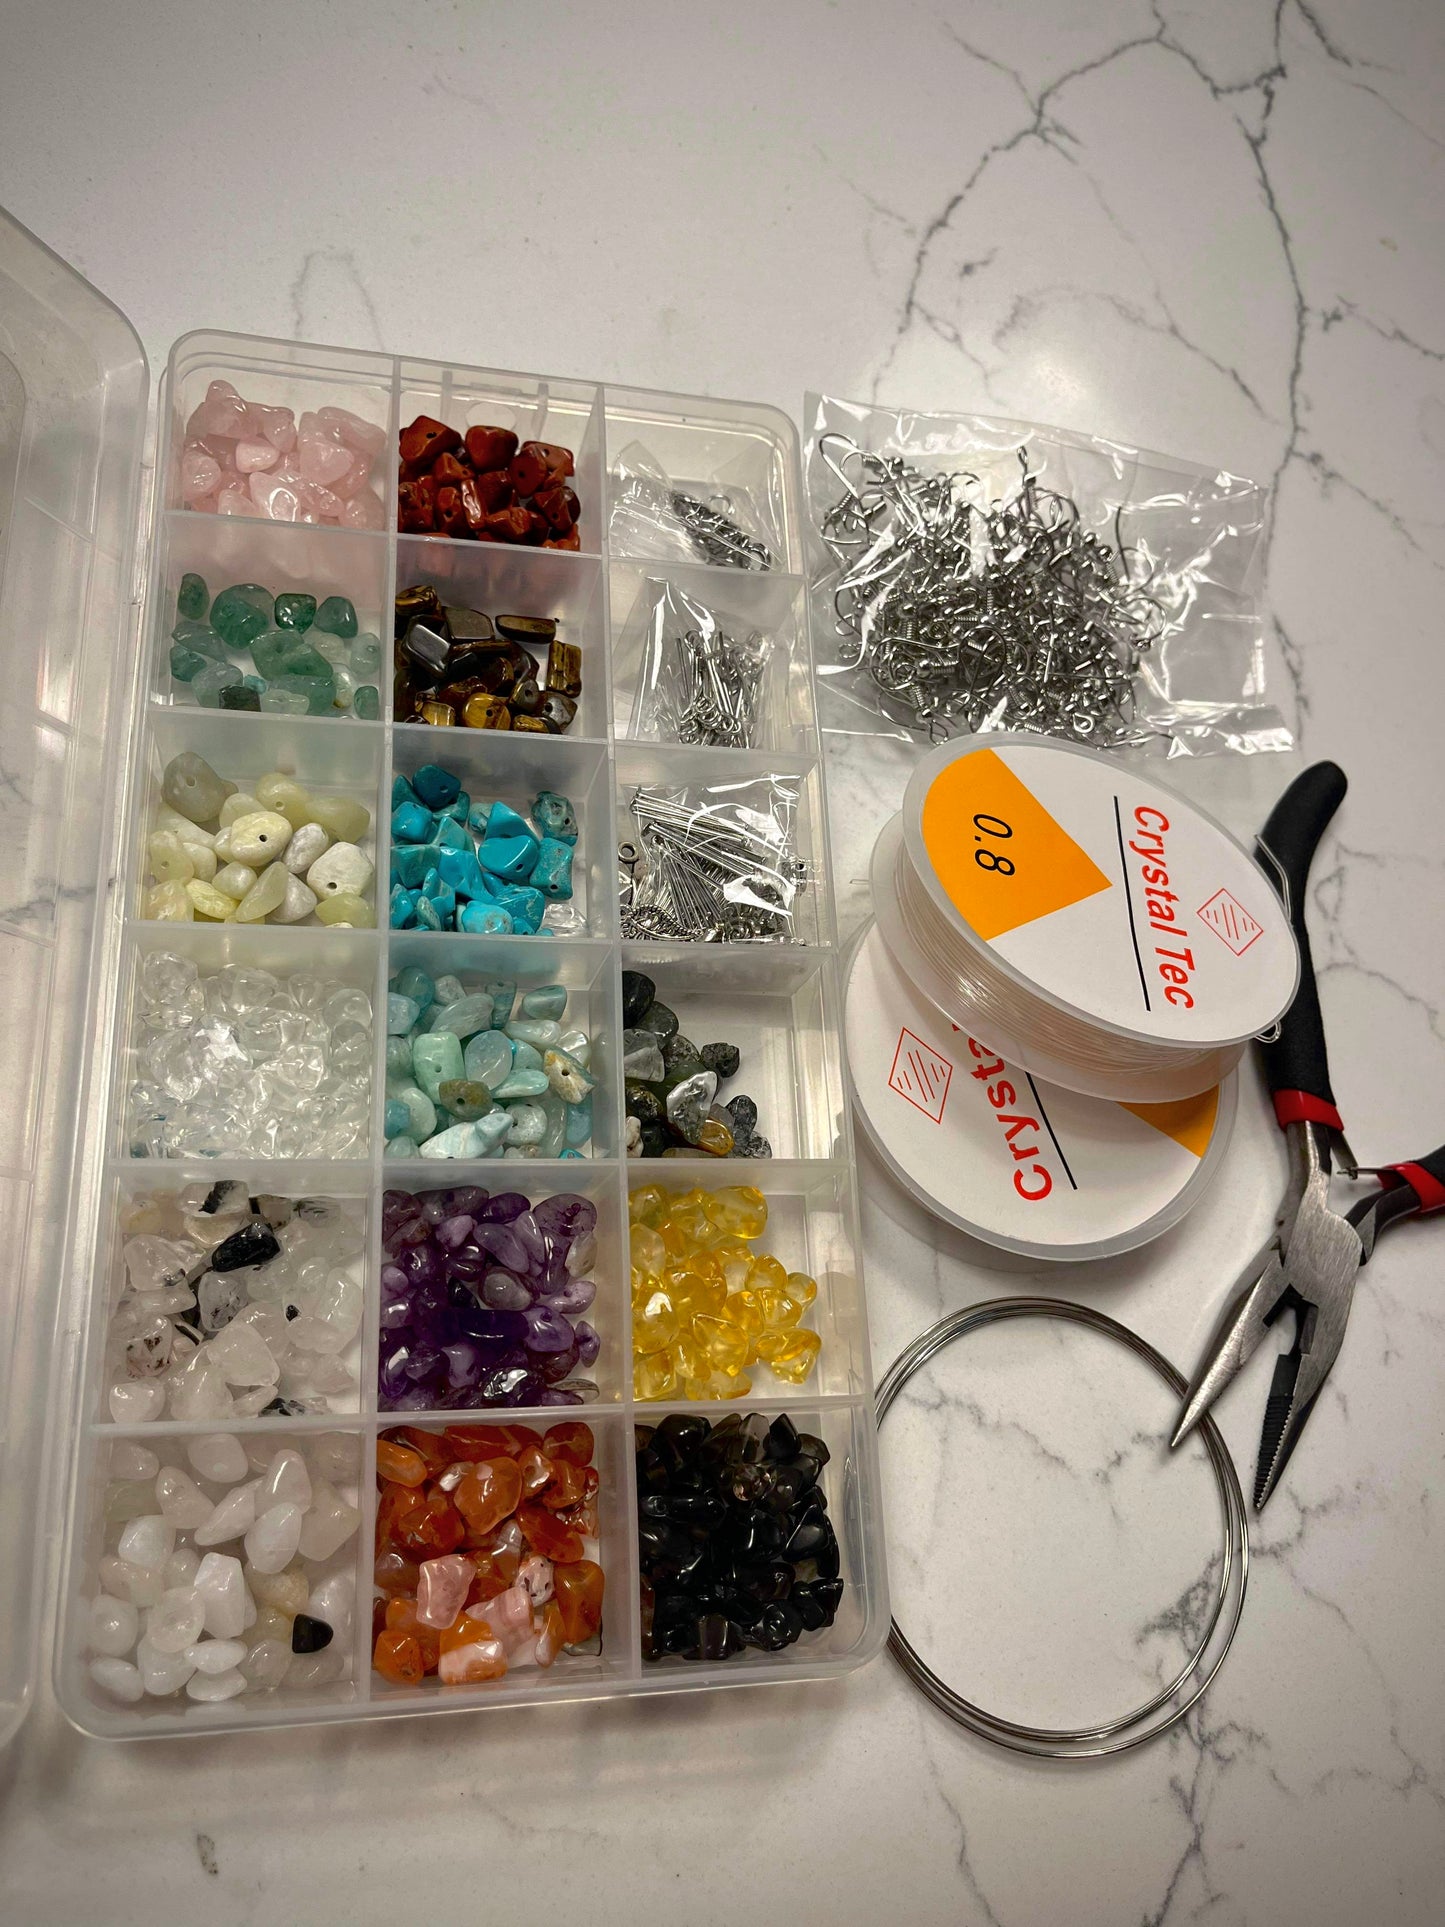 Jewelry making kit with stones